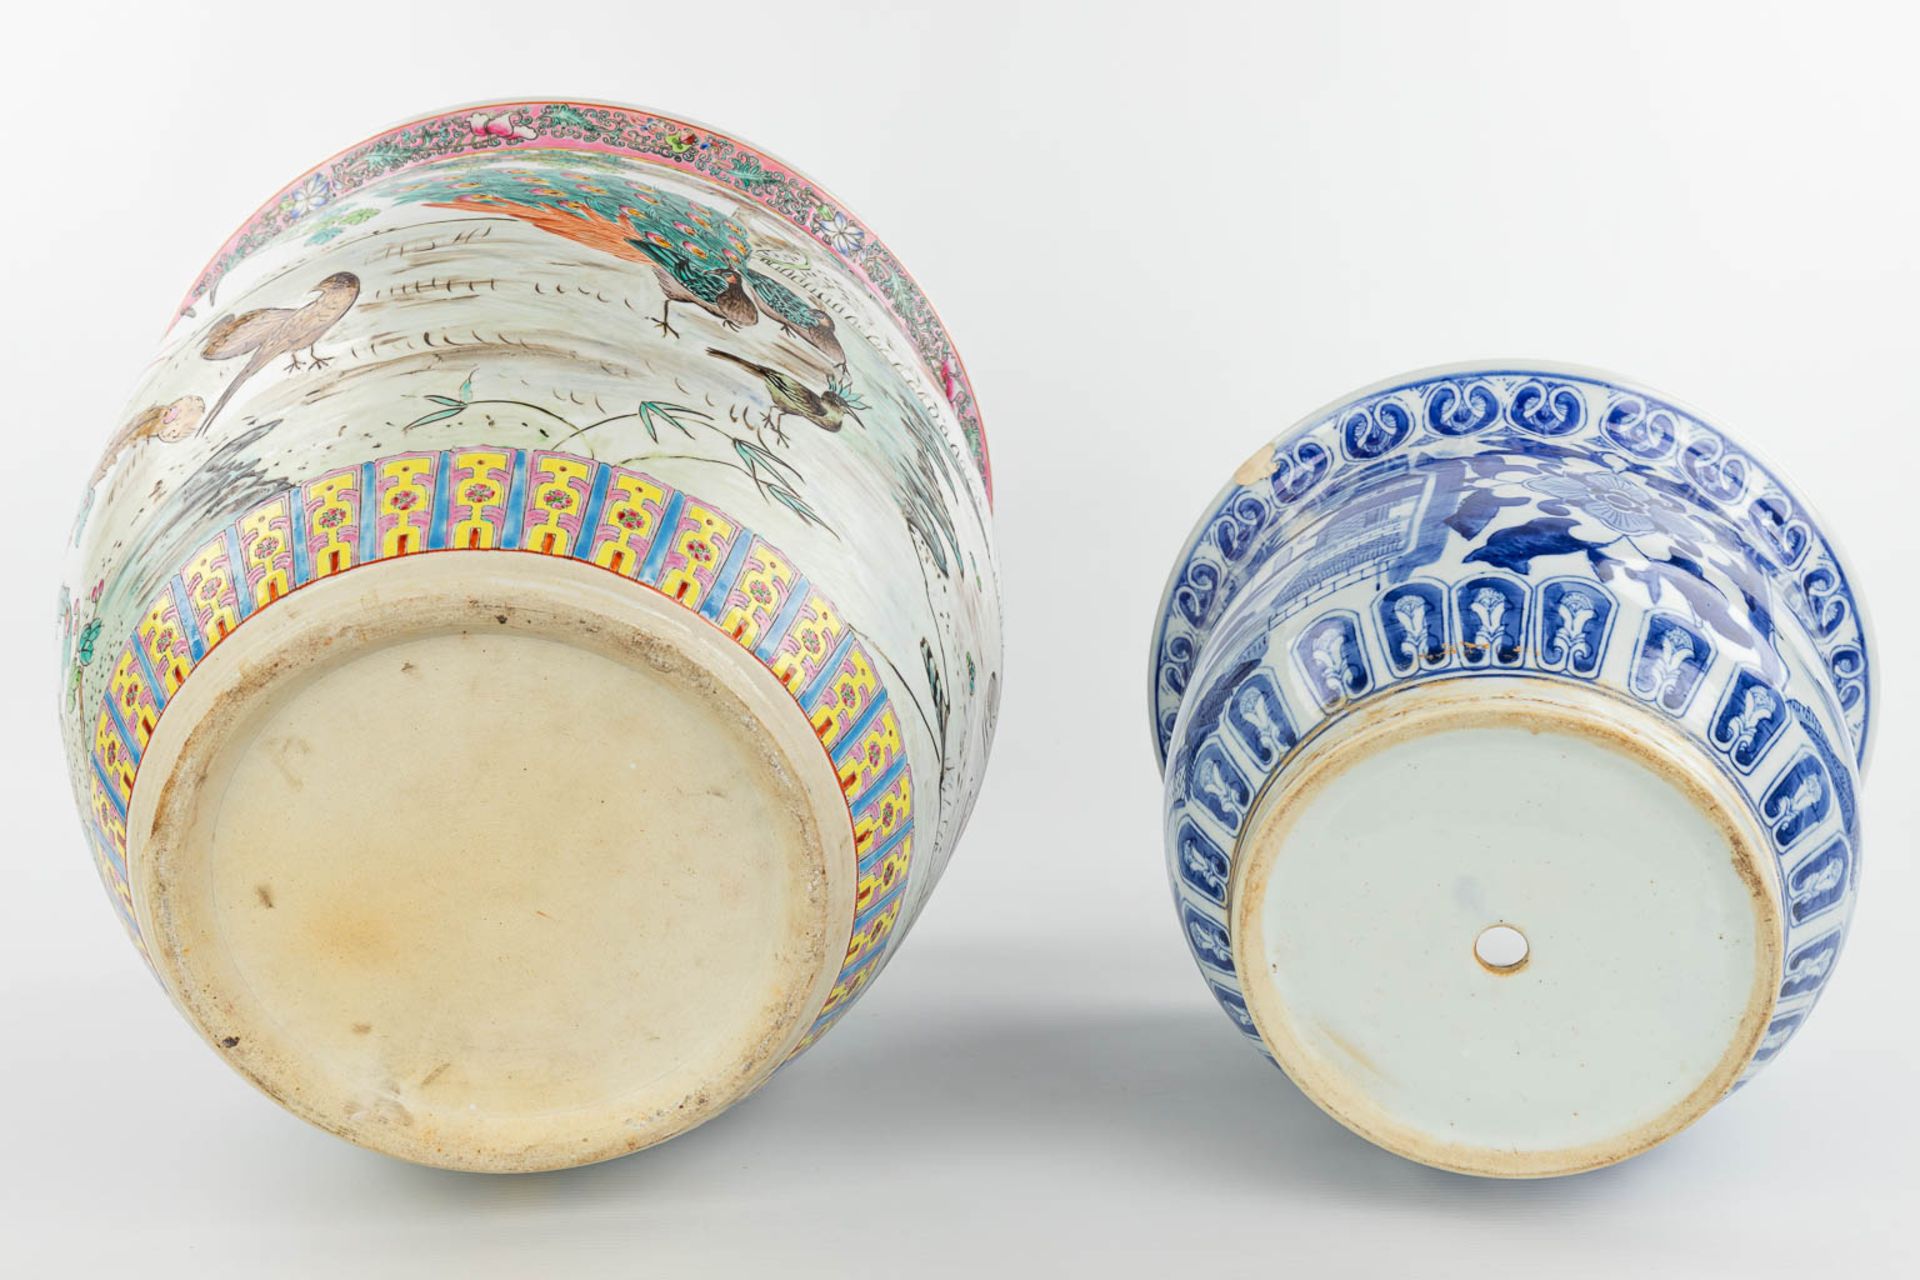 A set of 2 Chinese cache-pots made of porcelain of which 1 has a blue-white decor and the other a de - Image 9 of 15